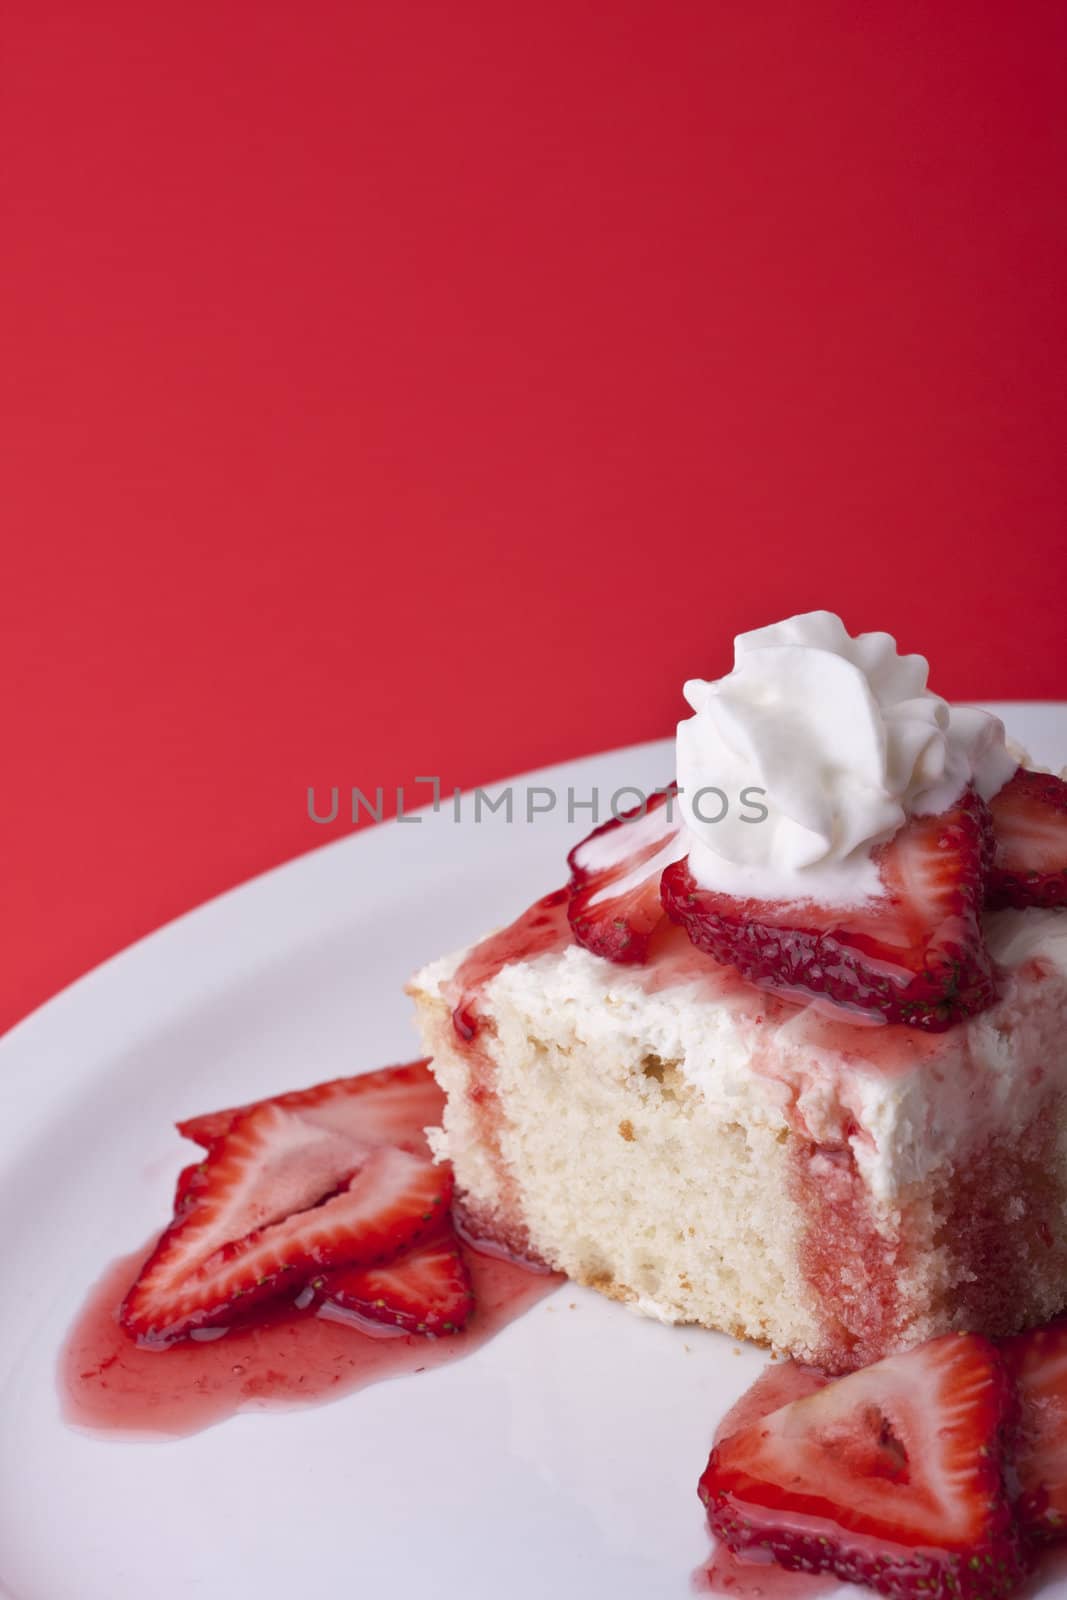 strawberry shortcake on a red background sliced berries and whipped cream